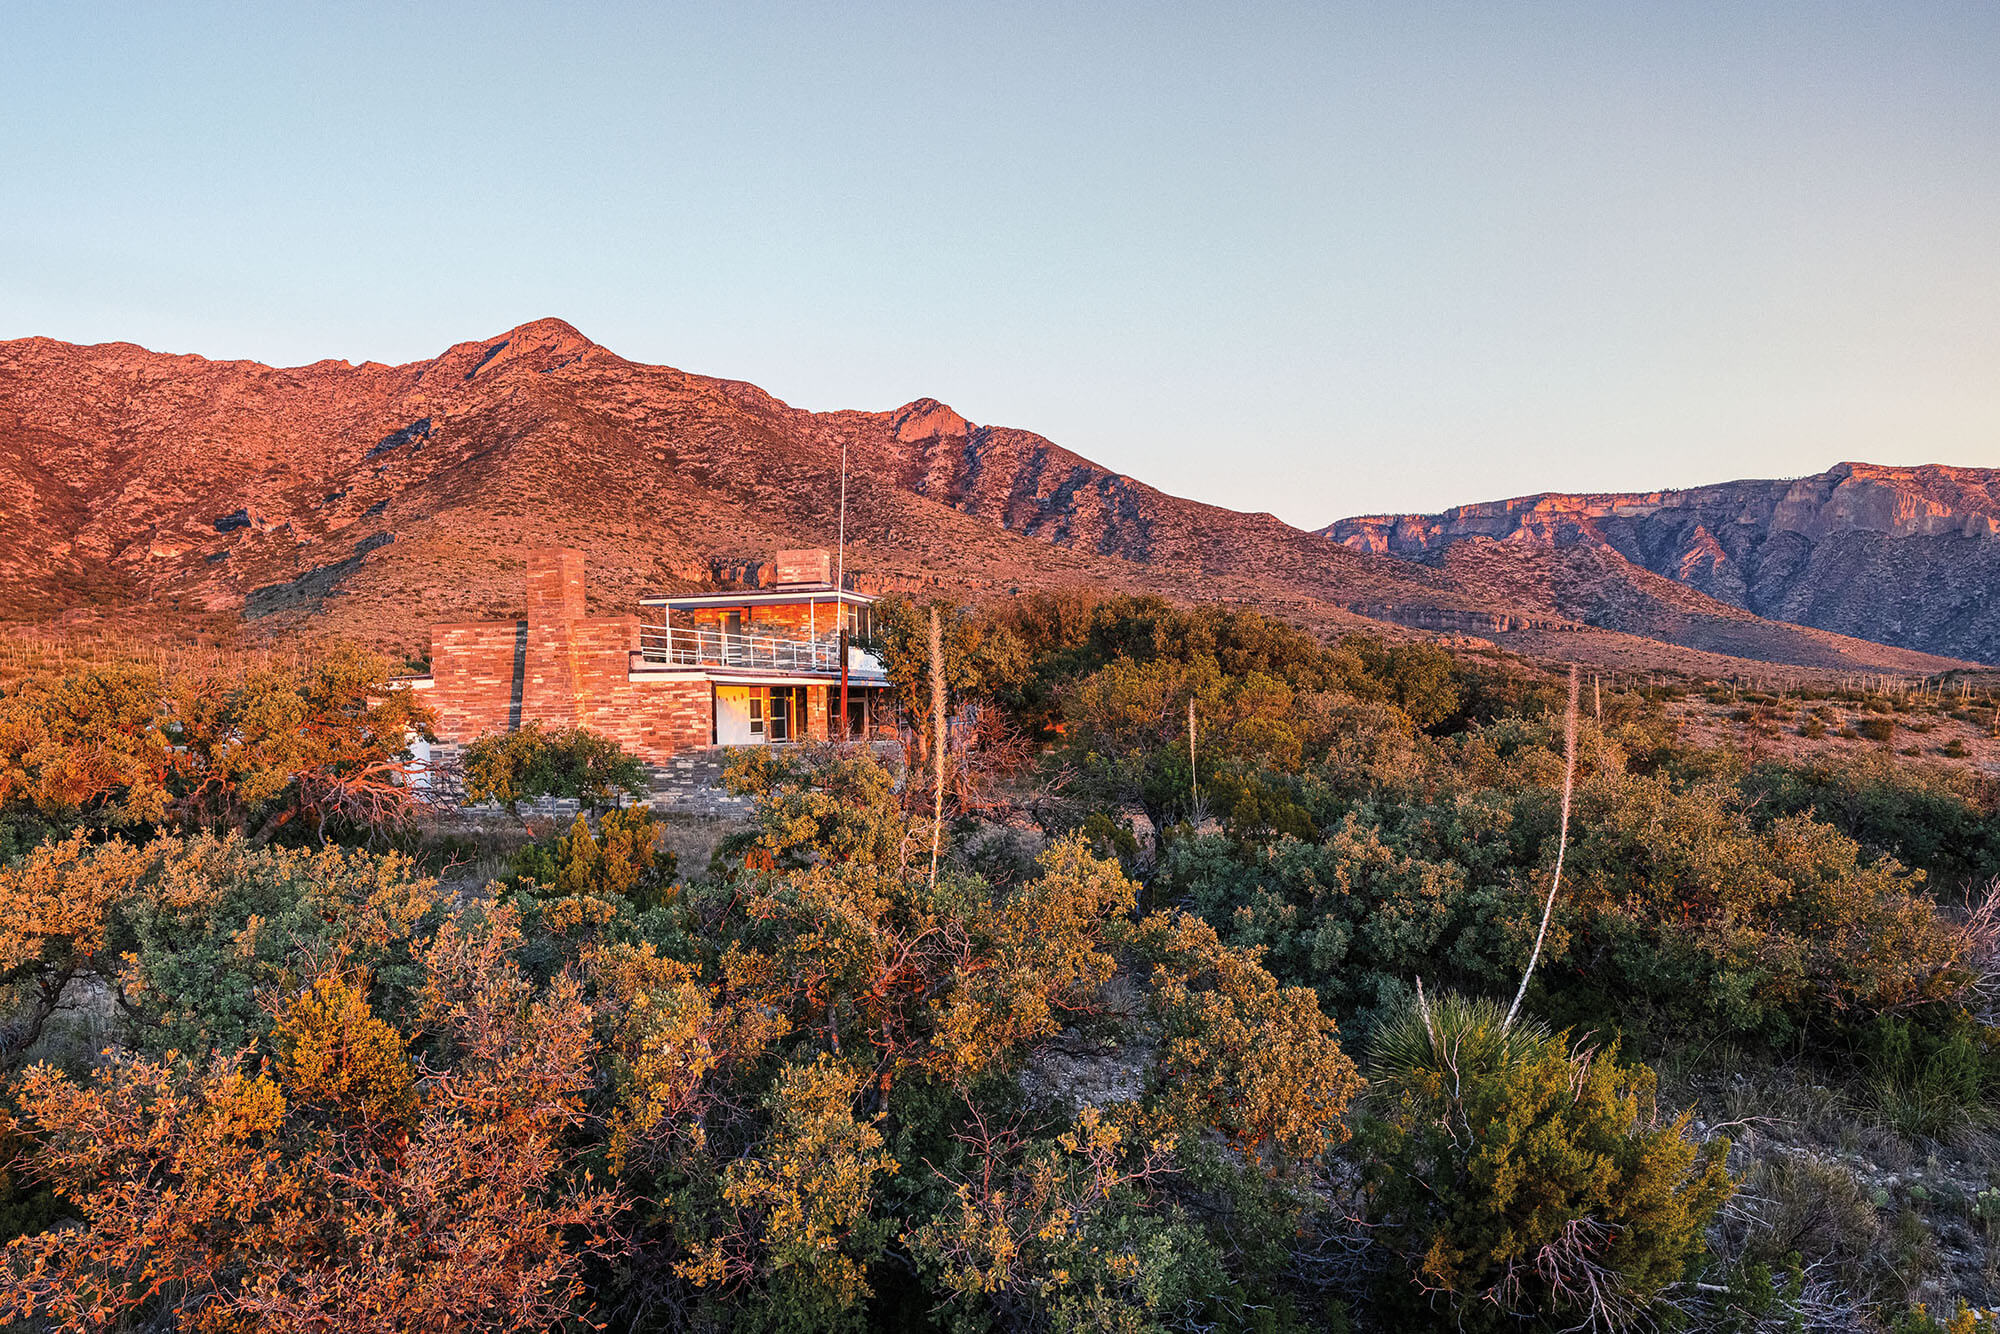 A large brick, midcentury home built in a desert landscape in front of a large rust-colored mountain